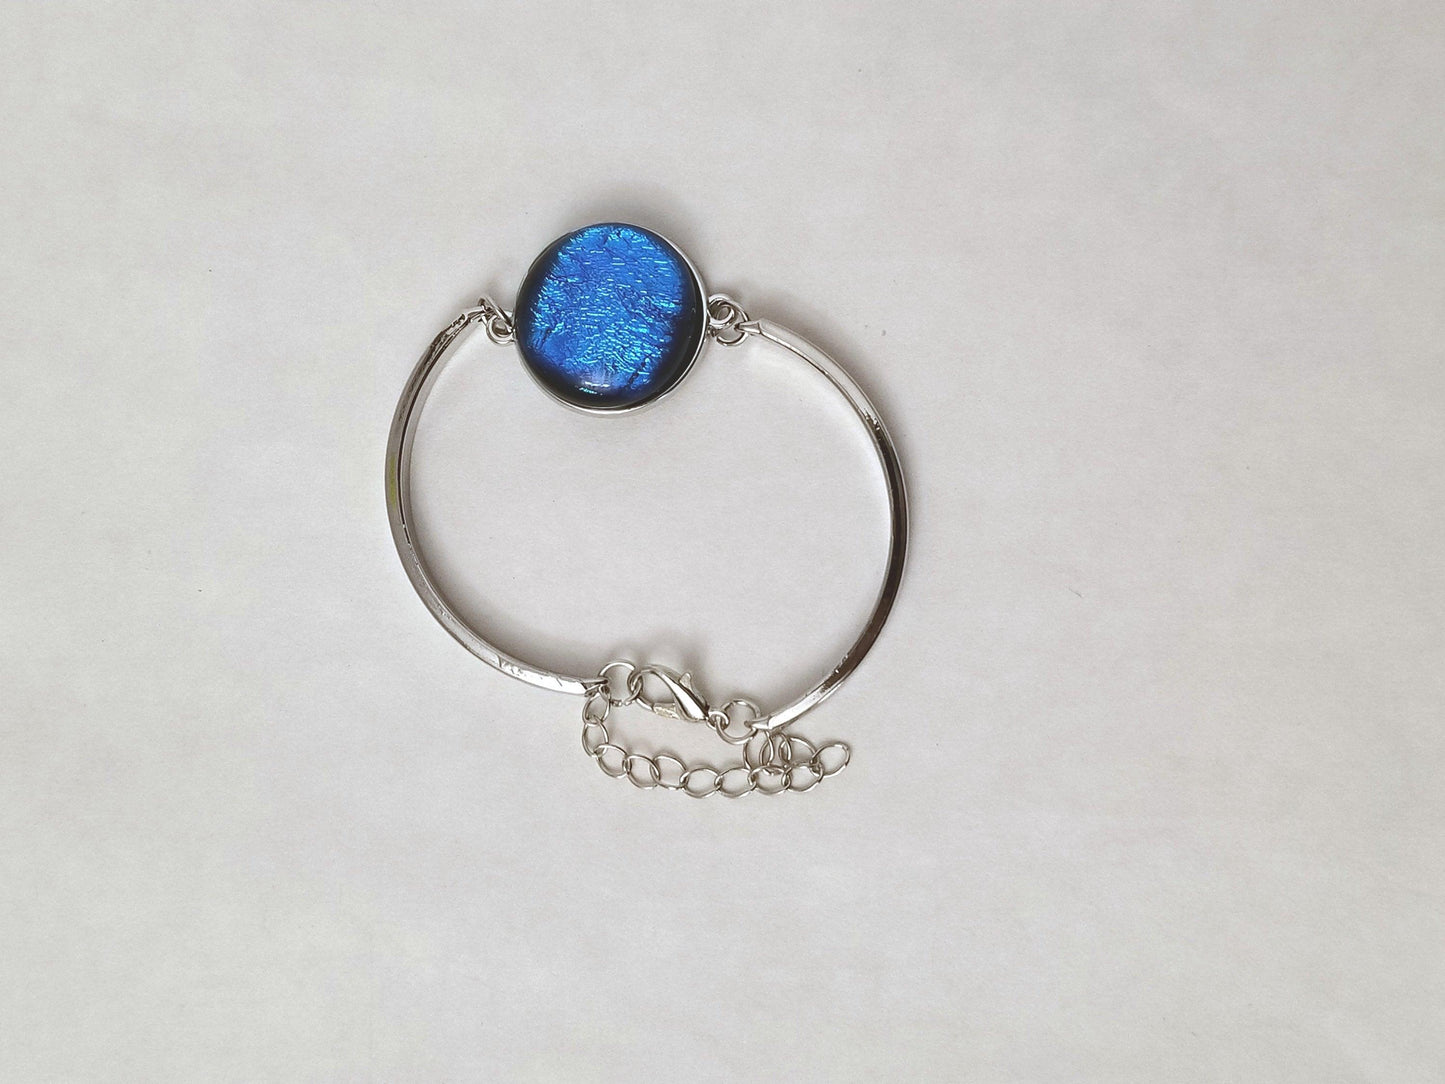 Delicate Adjustable Bracelet,  silver tone with medium Blue Dichroic fused glass cabochon